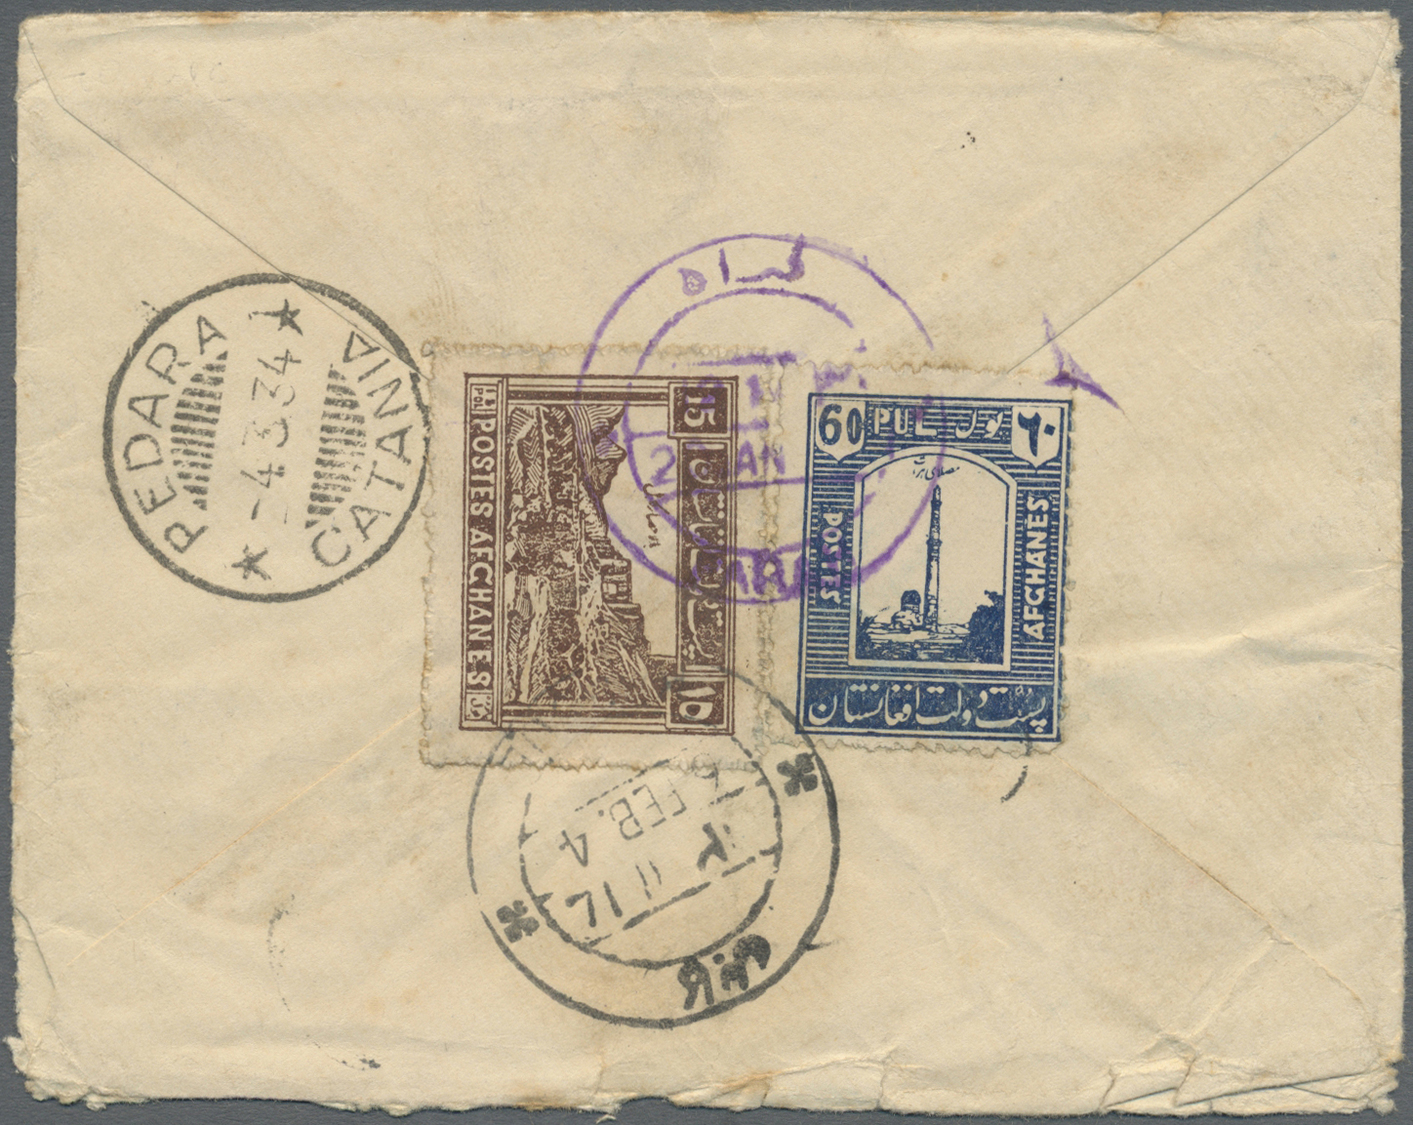 Br Afghanistan: 1934 Registered Cover From Farah To ITALY Via Kabul (6 Feb 34), The Southern Chaman-Quetta Route To Kara - Afghanistan